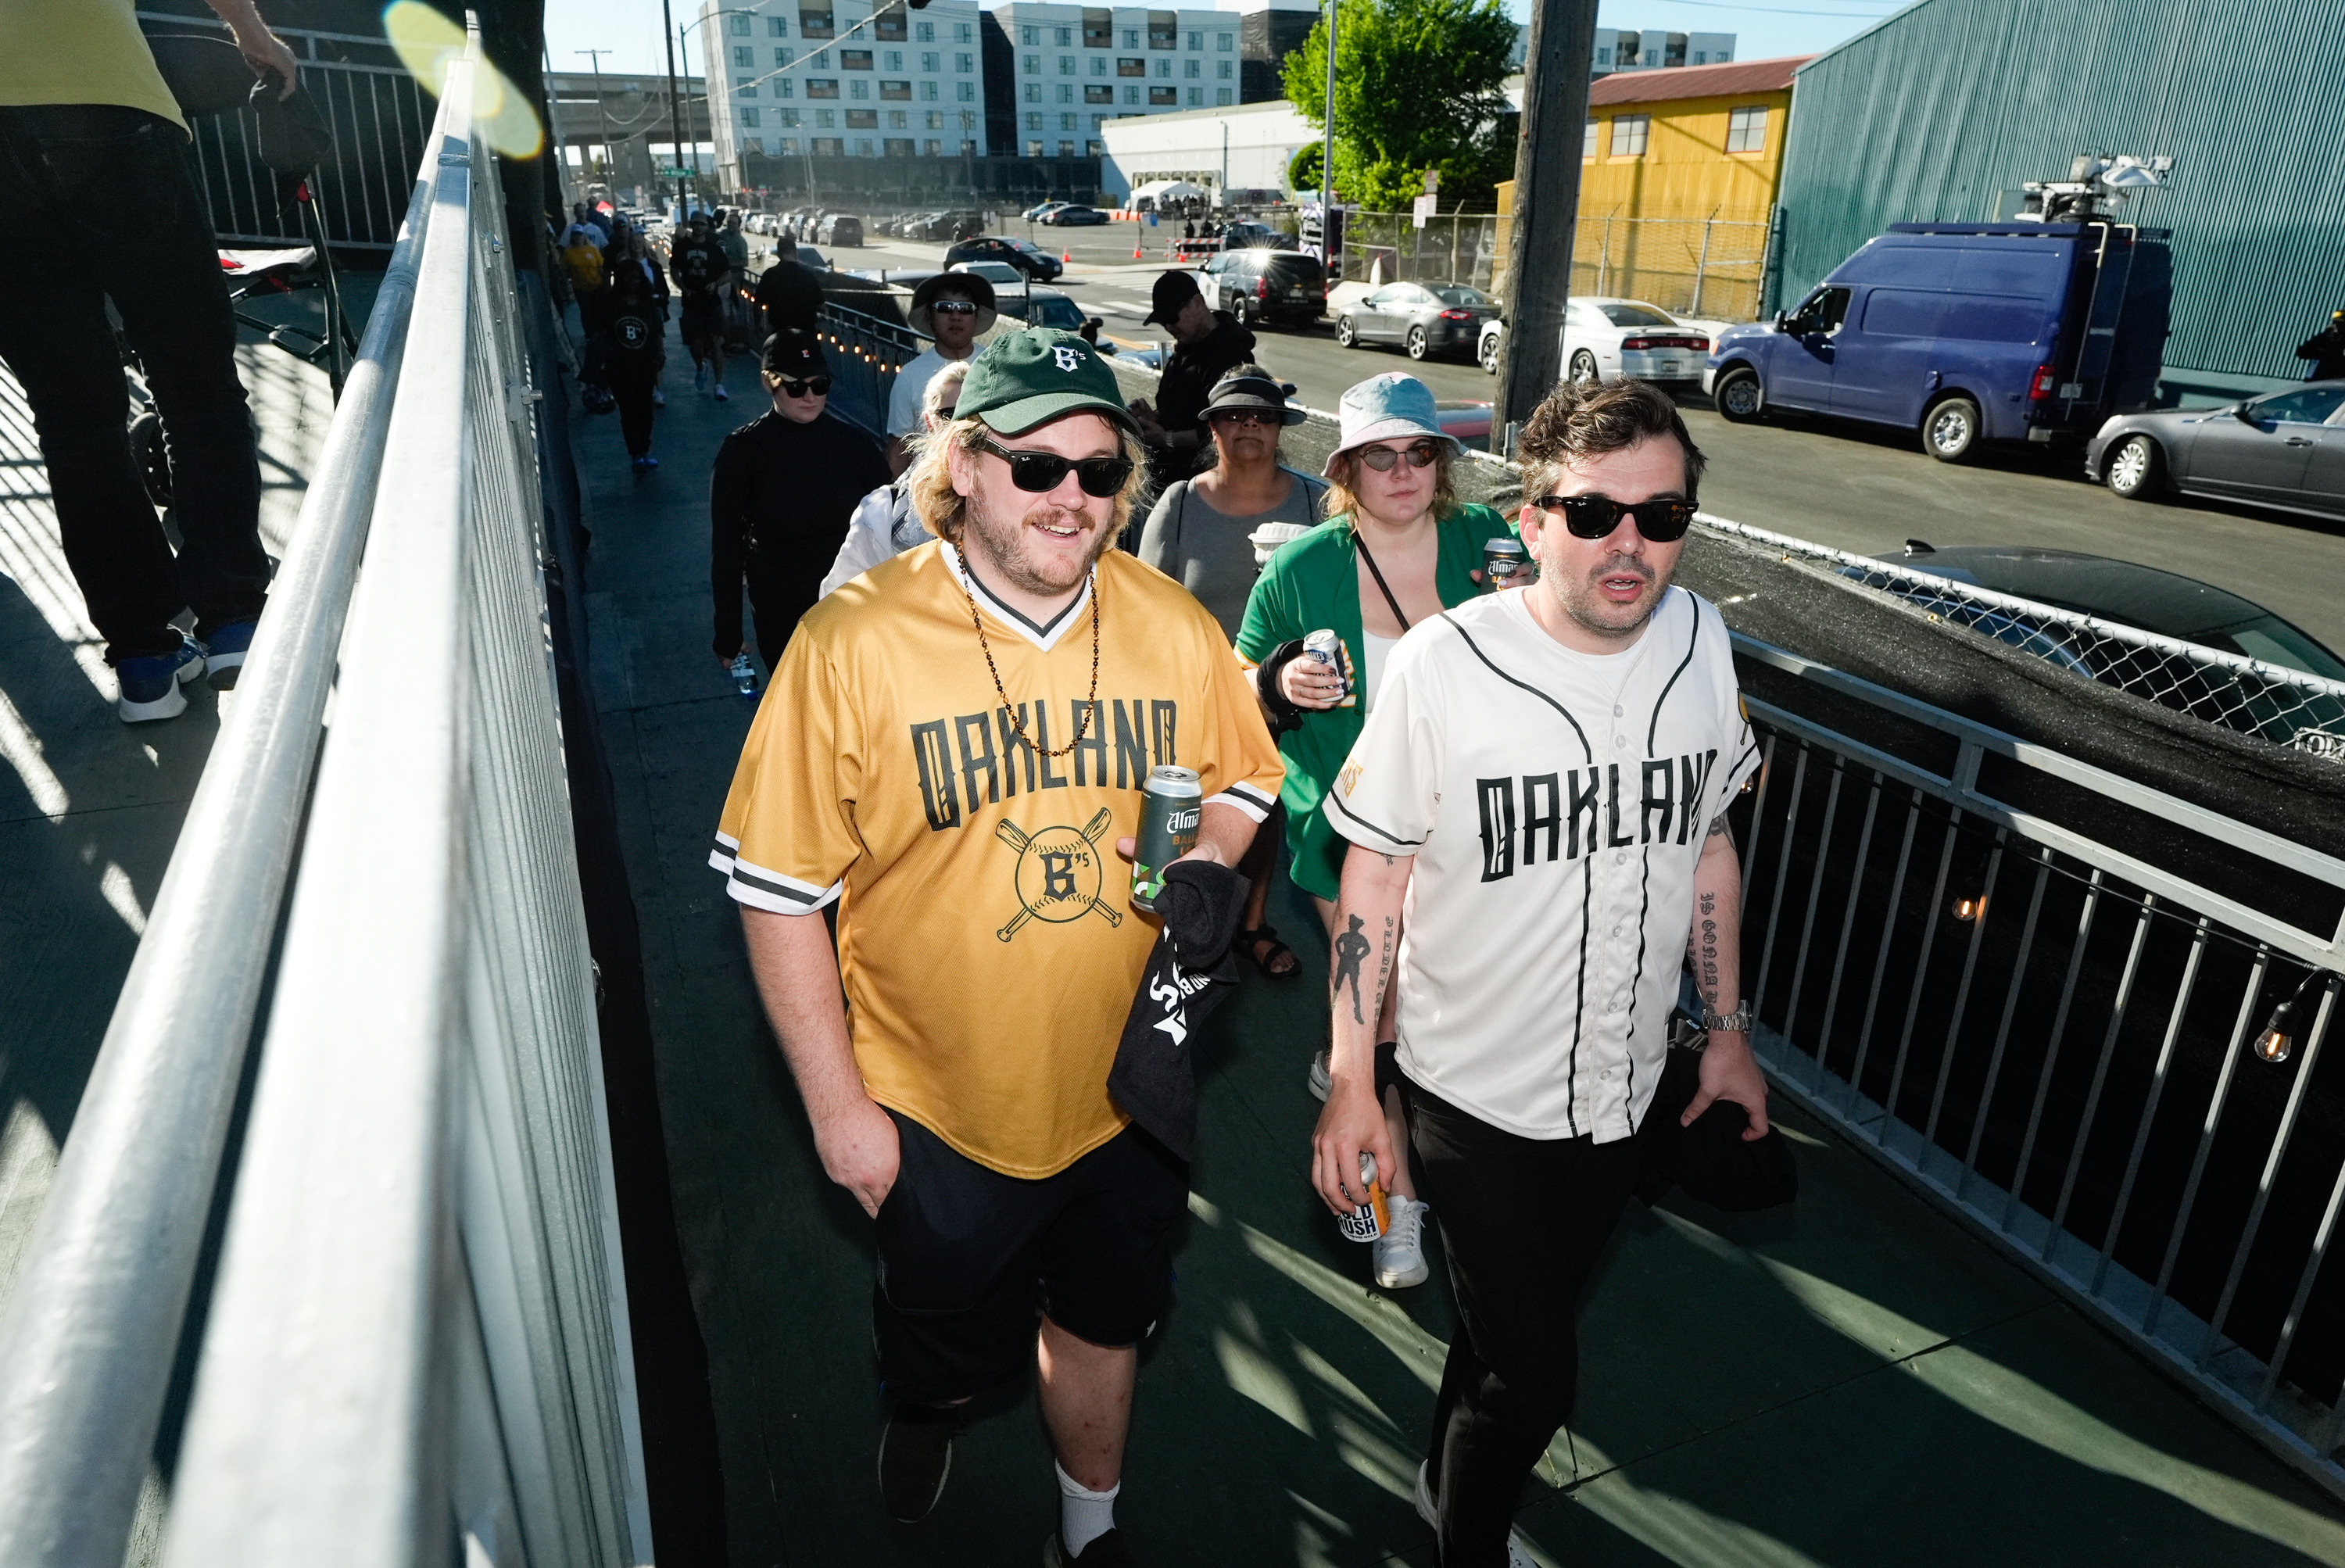 A group of people, most wearing Oakland-themed sports jerseys and sunglasses, are walking up a ramp in an urban outdoor setting on a sunny day.